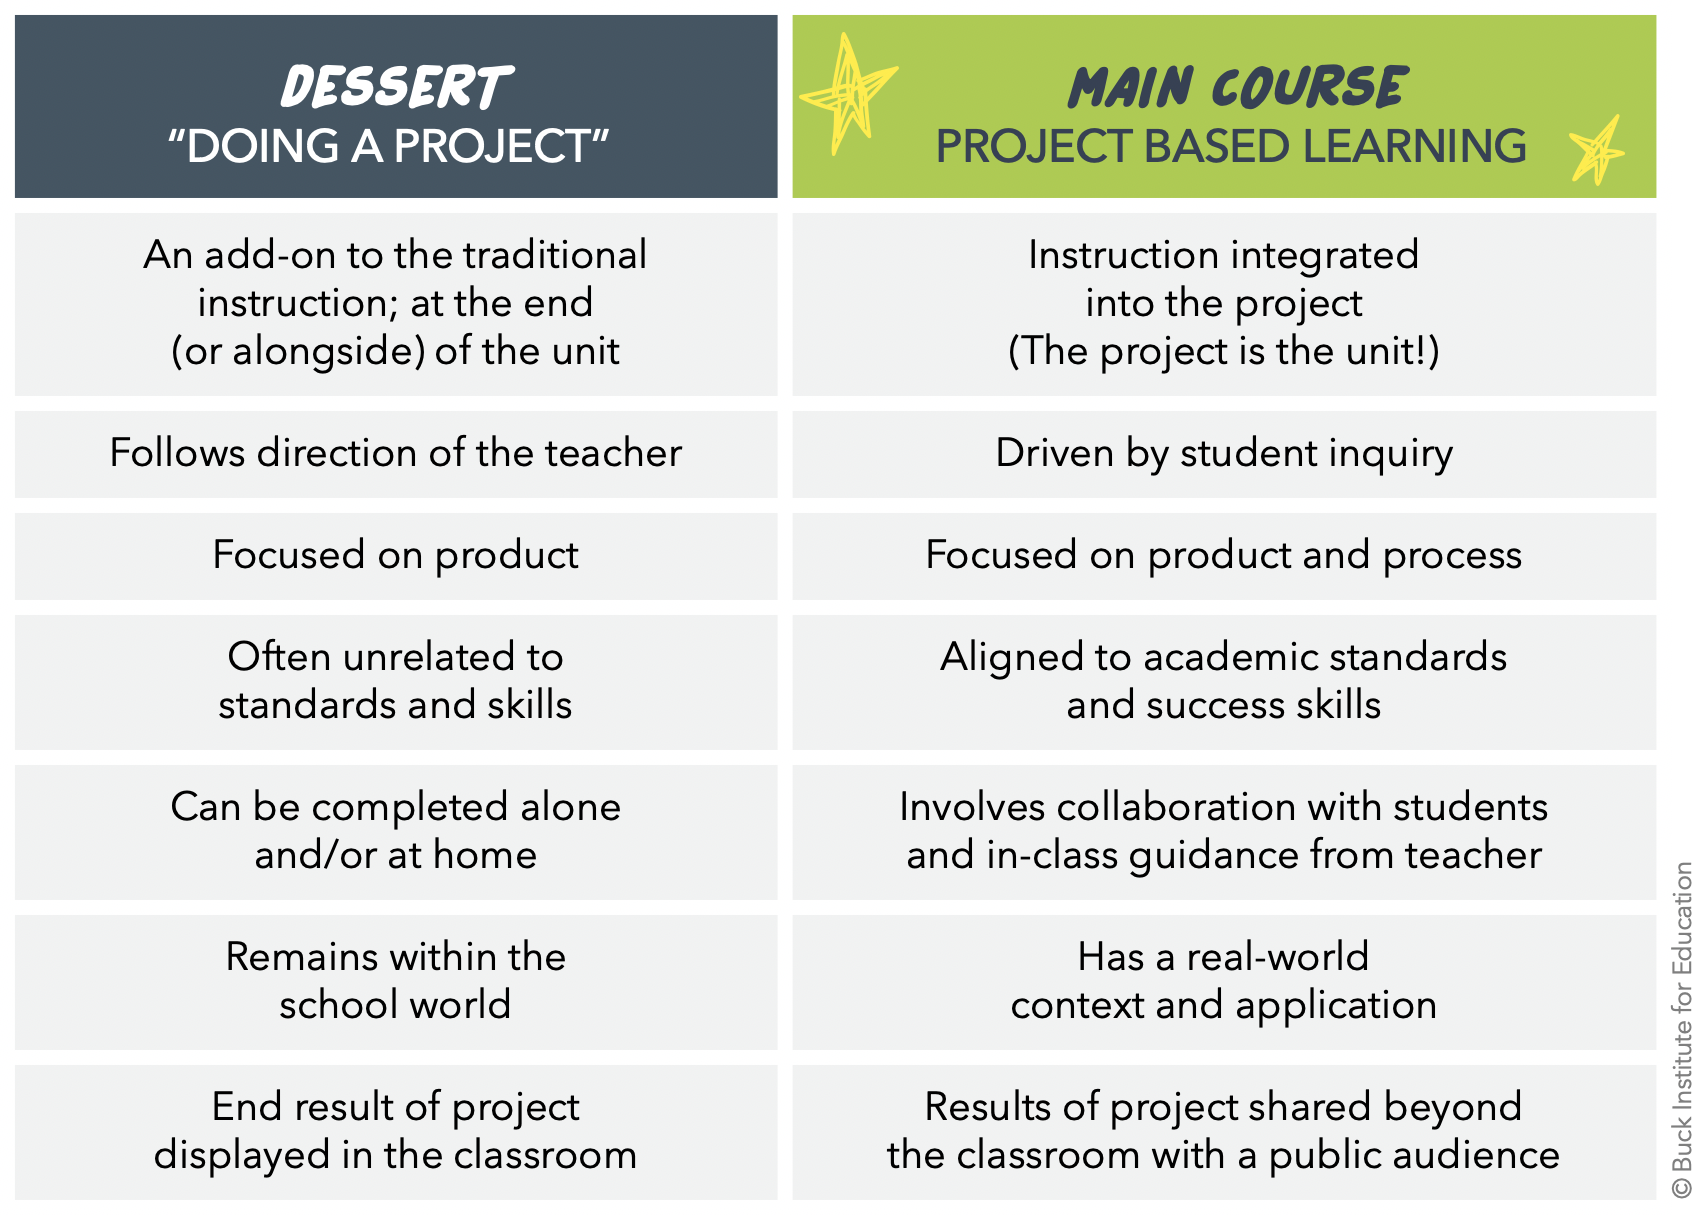 Table with two columns. Column 1 is: Dessert or Doing a Project. 1. An add-on to the traditional  instruction; at the end  (or alongside) of the unit; 2. Follows direction of the teacher; 3. Focused on product; 4. Often unrelated to  standards and skills; 5. Can be completed alone  and/or at home; 6. Remains within the  school world; 7. End result of project  displayed in the classroom. Column 2 is: Main course or Project Based Learning. 1.Instruction integrated into the project (The project is the unit!); 2.Driven by student inquiry; 3.Focused on product and process; 4.Aligned to academic standards  and success skills; 5.Involves collaboration with students  and in-class guidance from teacher; 6.Has a real-world  context and application; 7.Results of project shared beyond  the classroom with a public audience